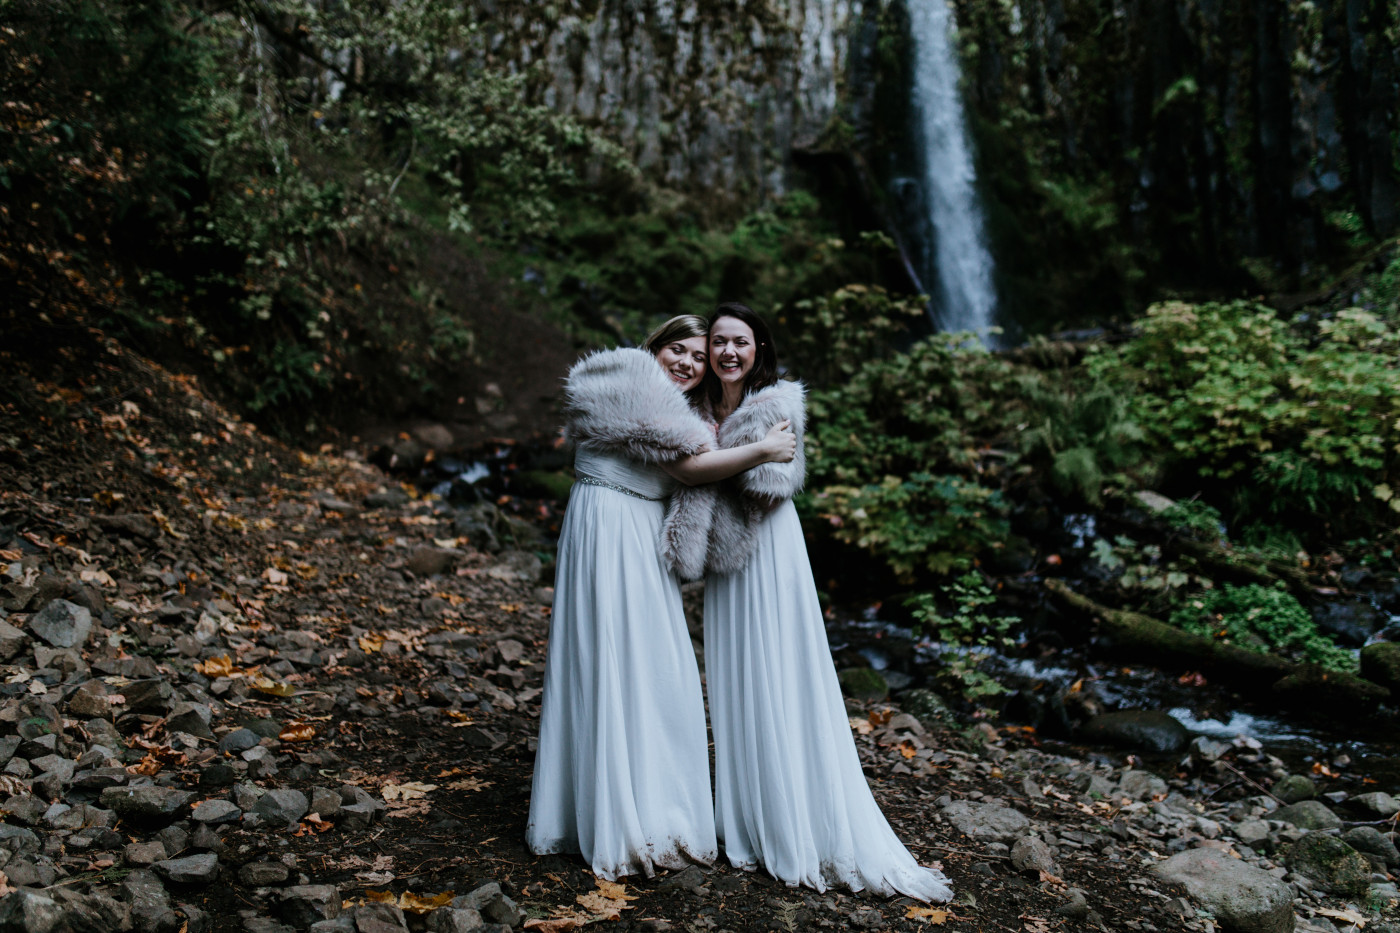 Tiffany and Hayley hugging. Elopement photography at the Columbia River Gorge by Sienna Plus Josh.